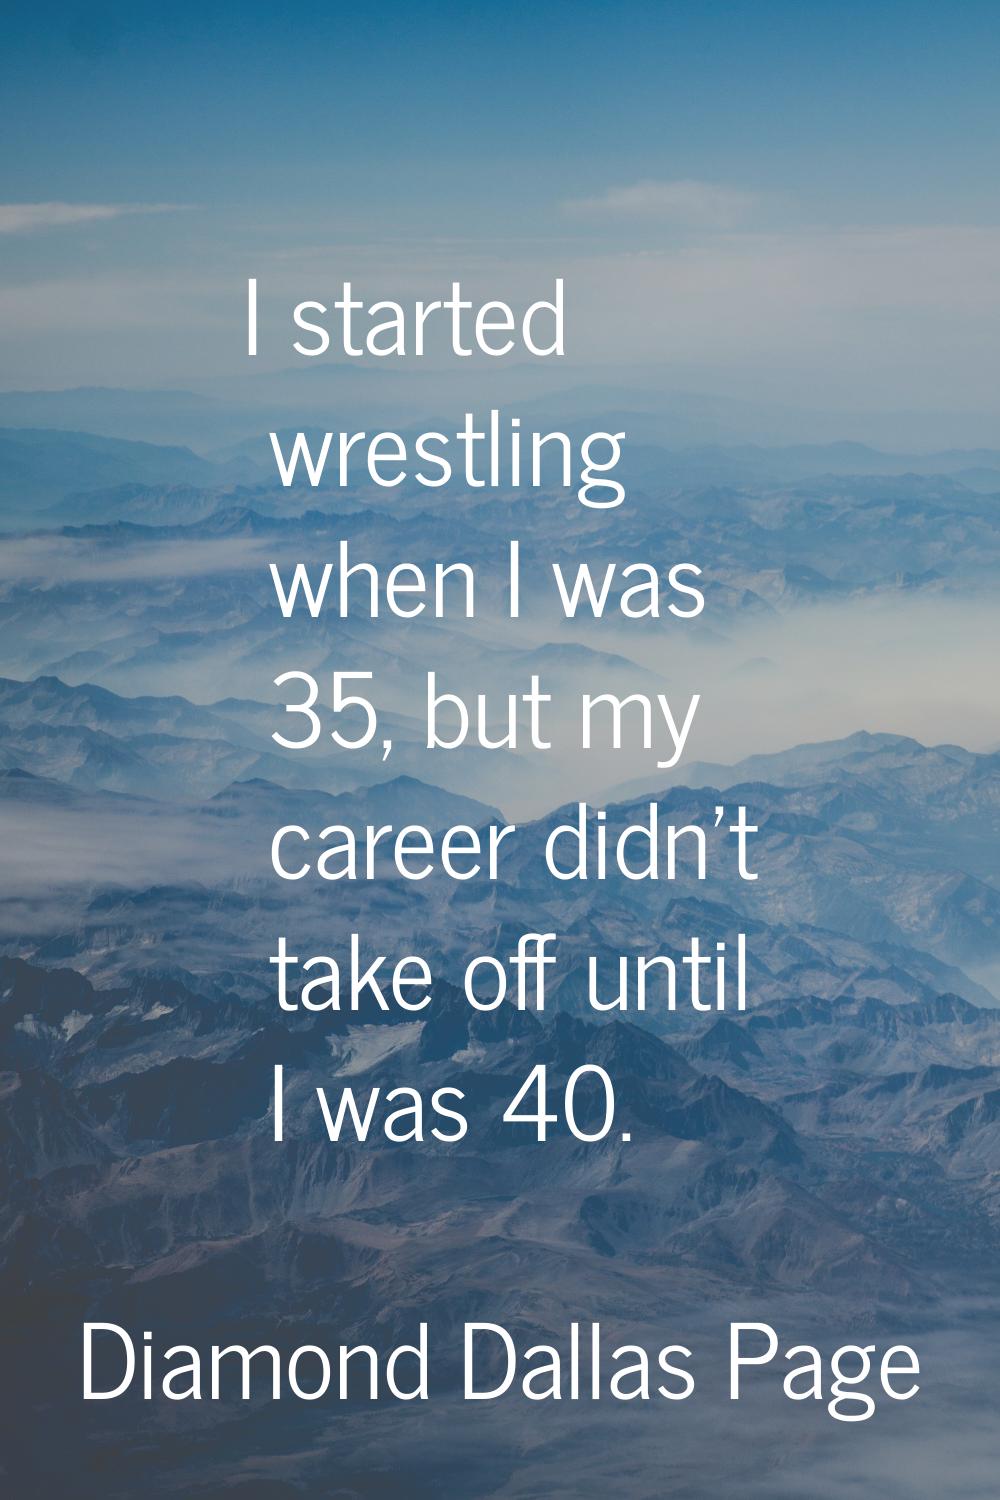 I started wrestling when I was 35, but my career didn't take off until I was 40.